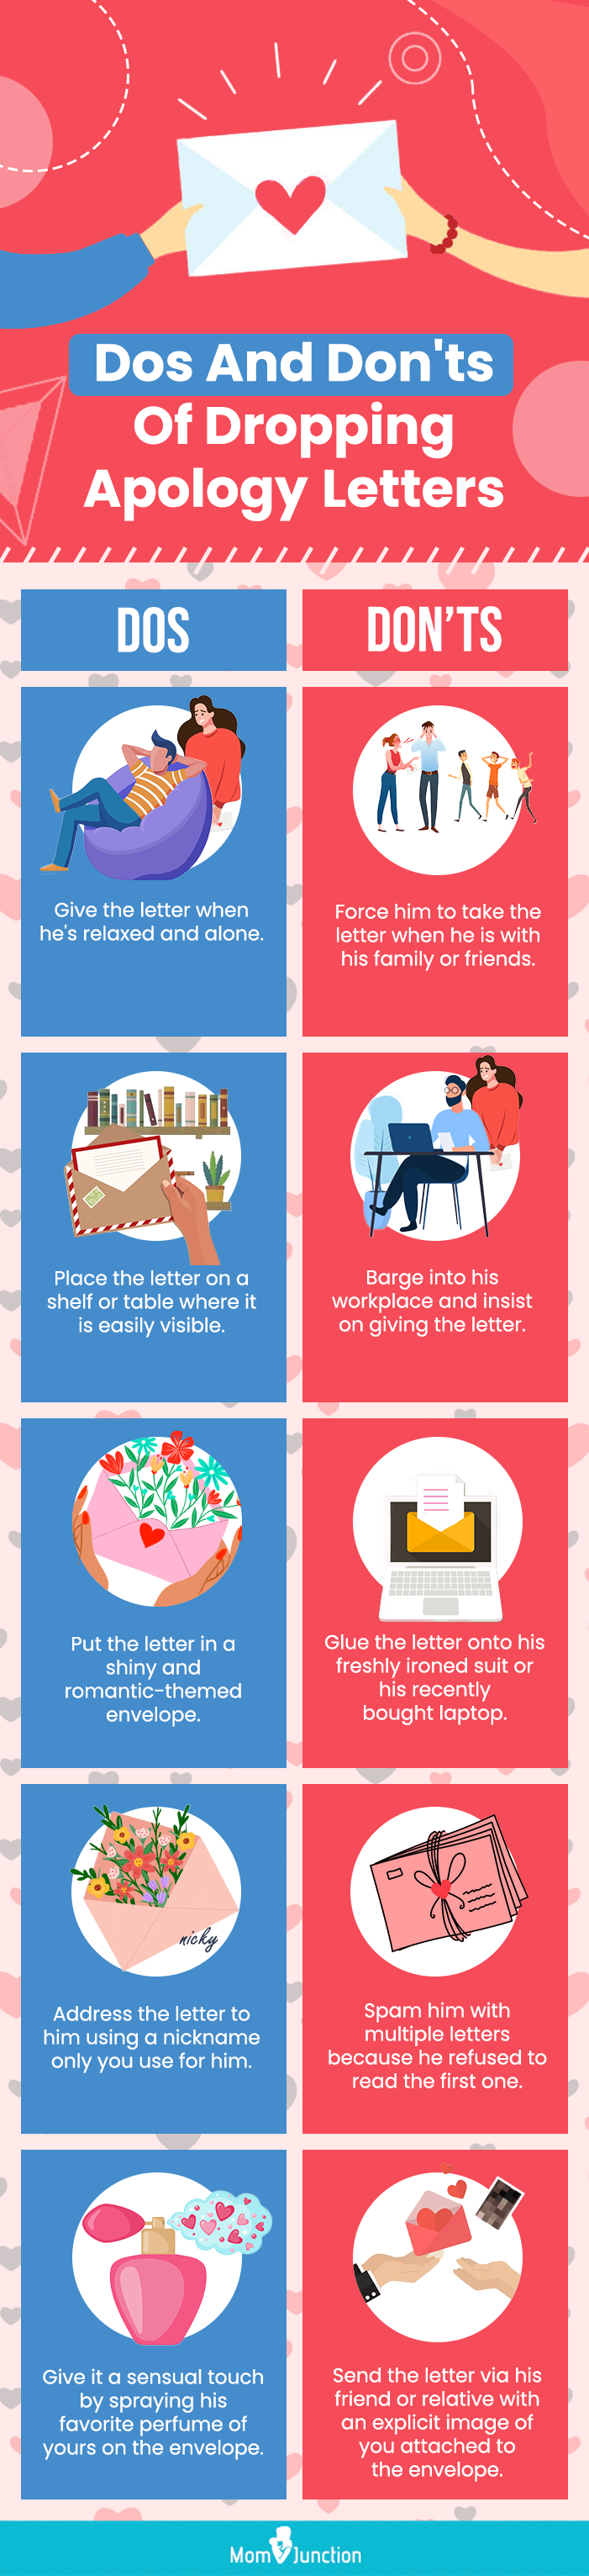 do and donts of dropping a letter [infographic]